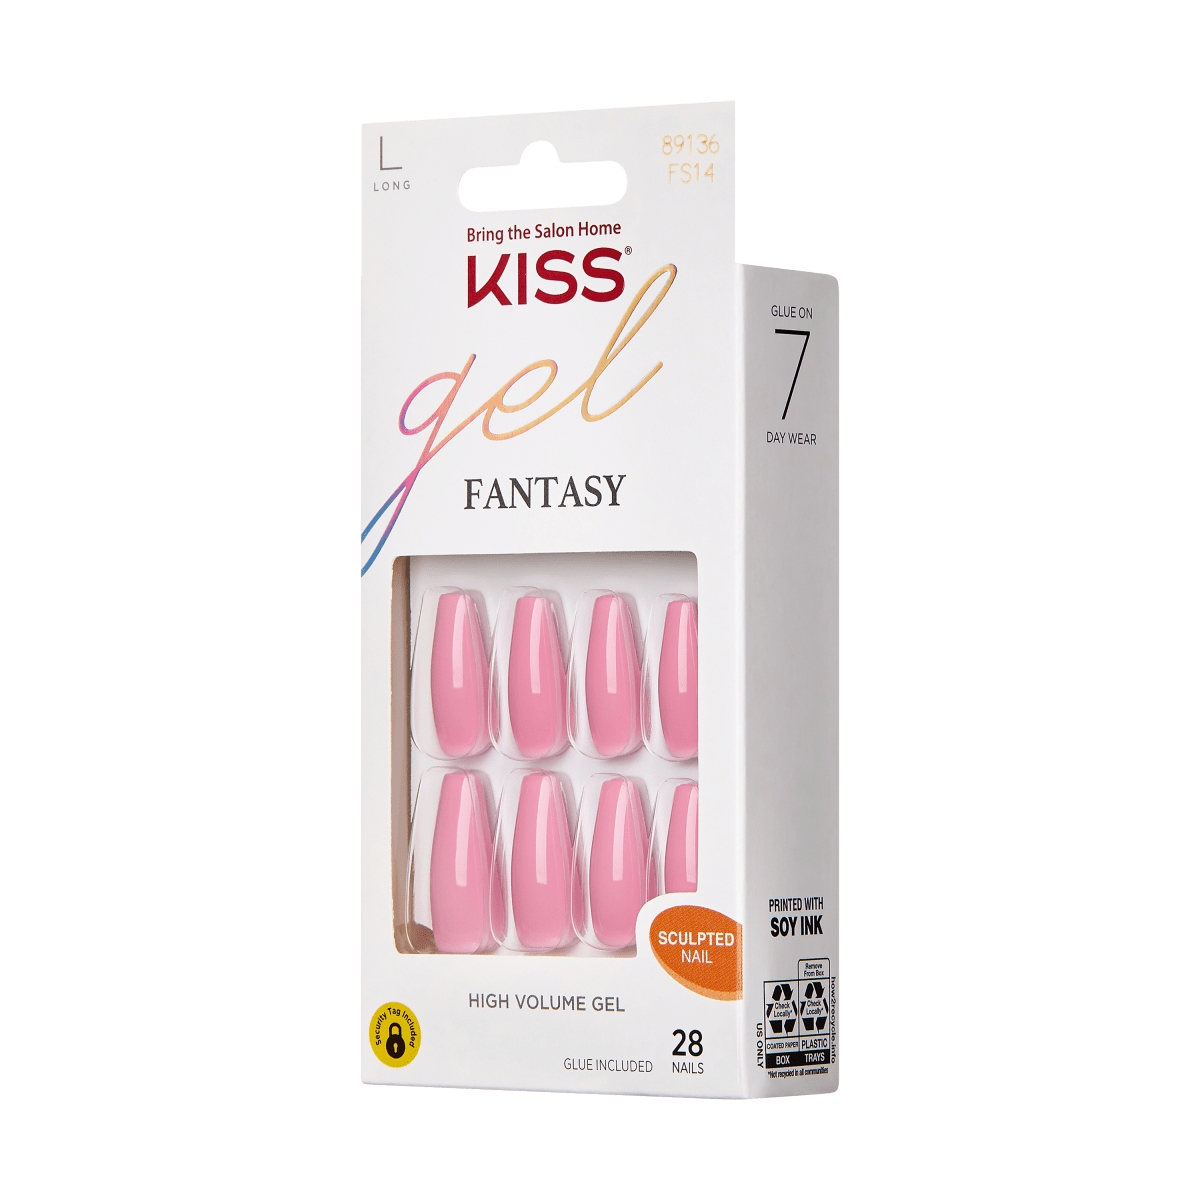 KISS Gel Fantasy, Press-On Nails, Countless Times, Pink, Long Coffin, 28ct